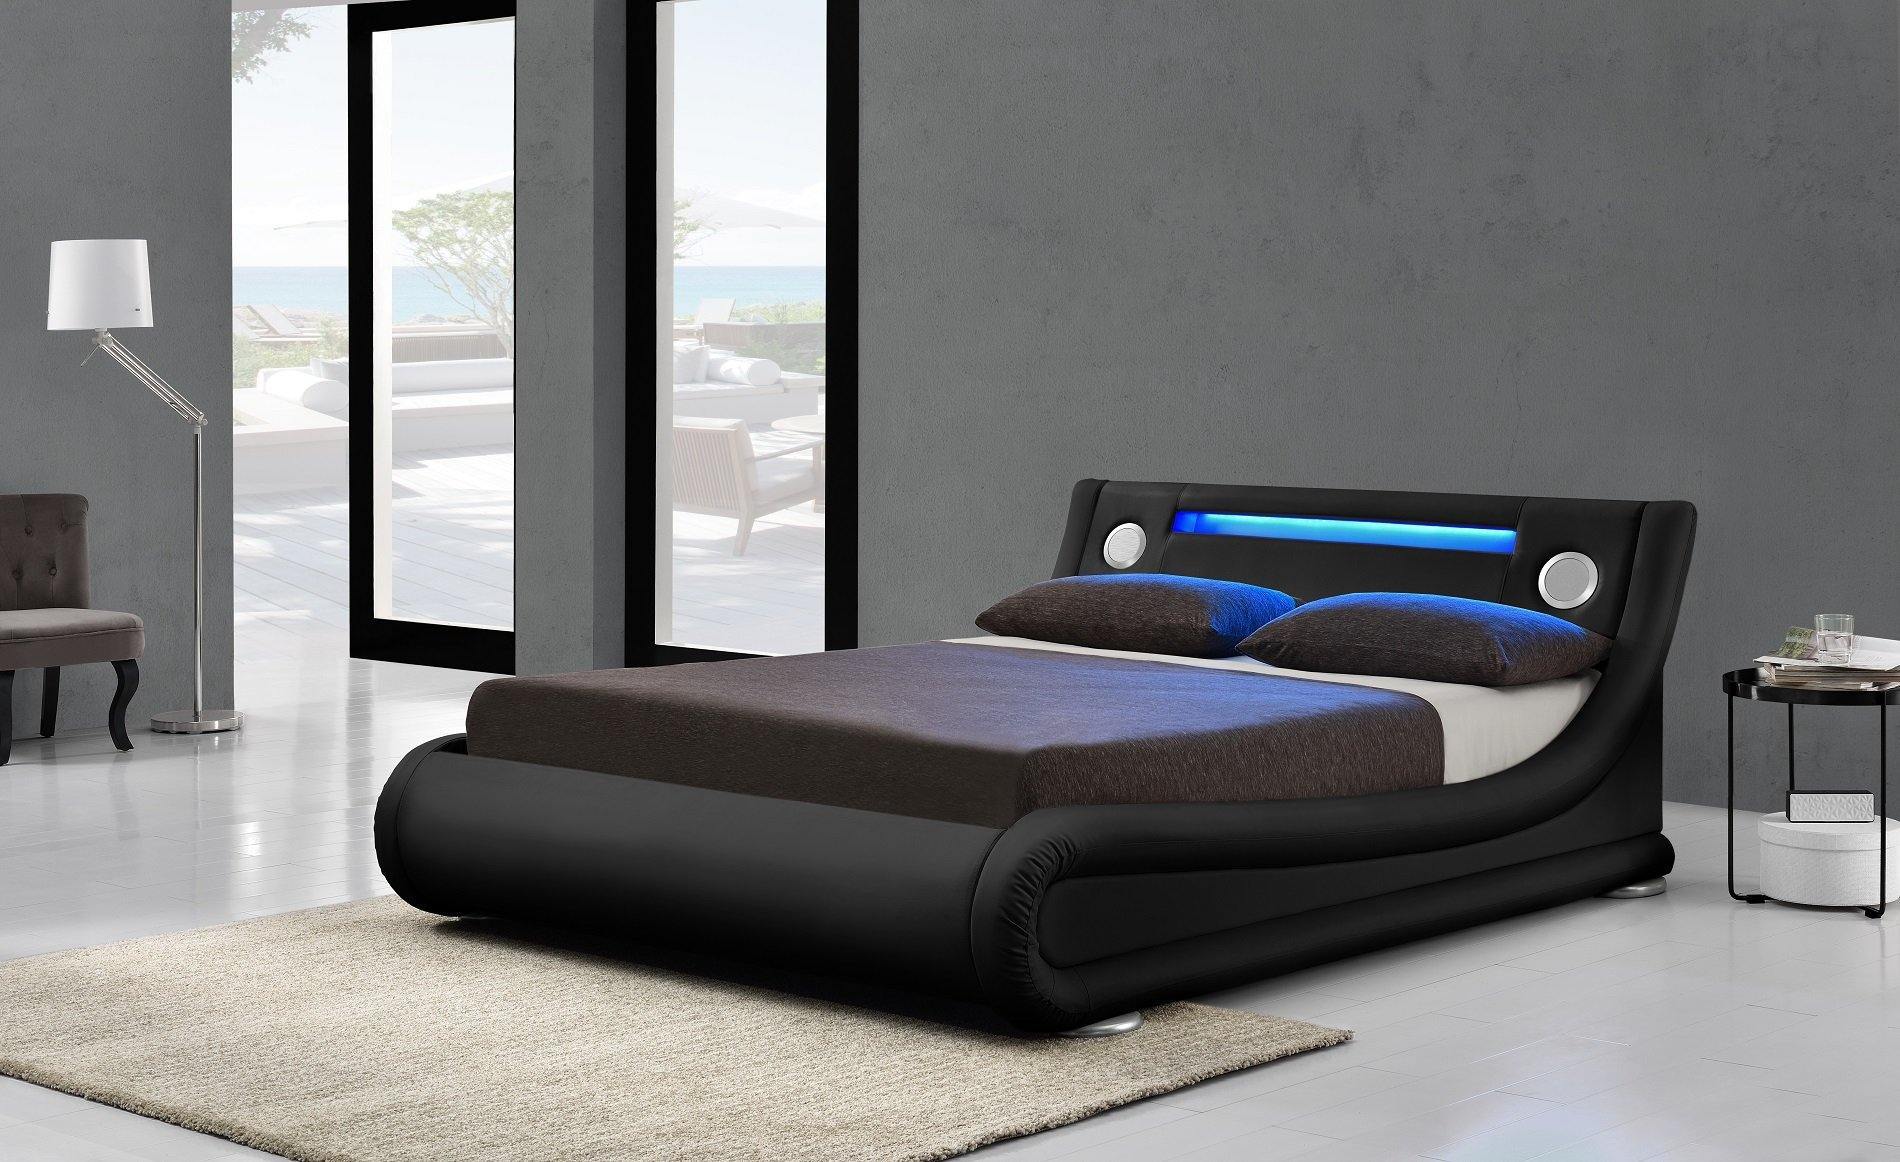 Bentley Ottoman & Bluetooth Speakers LED Bed - Black PU Leather - Size: Double Bed Casa Maria Designs 